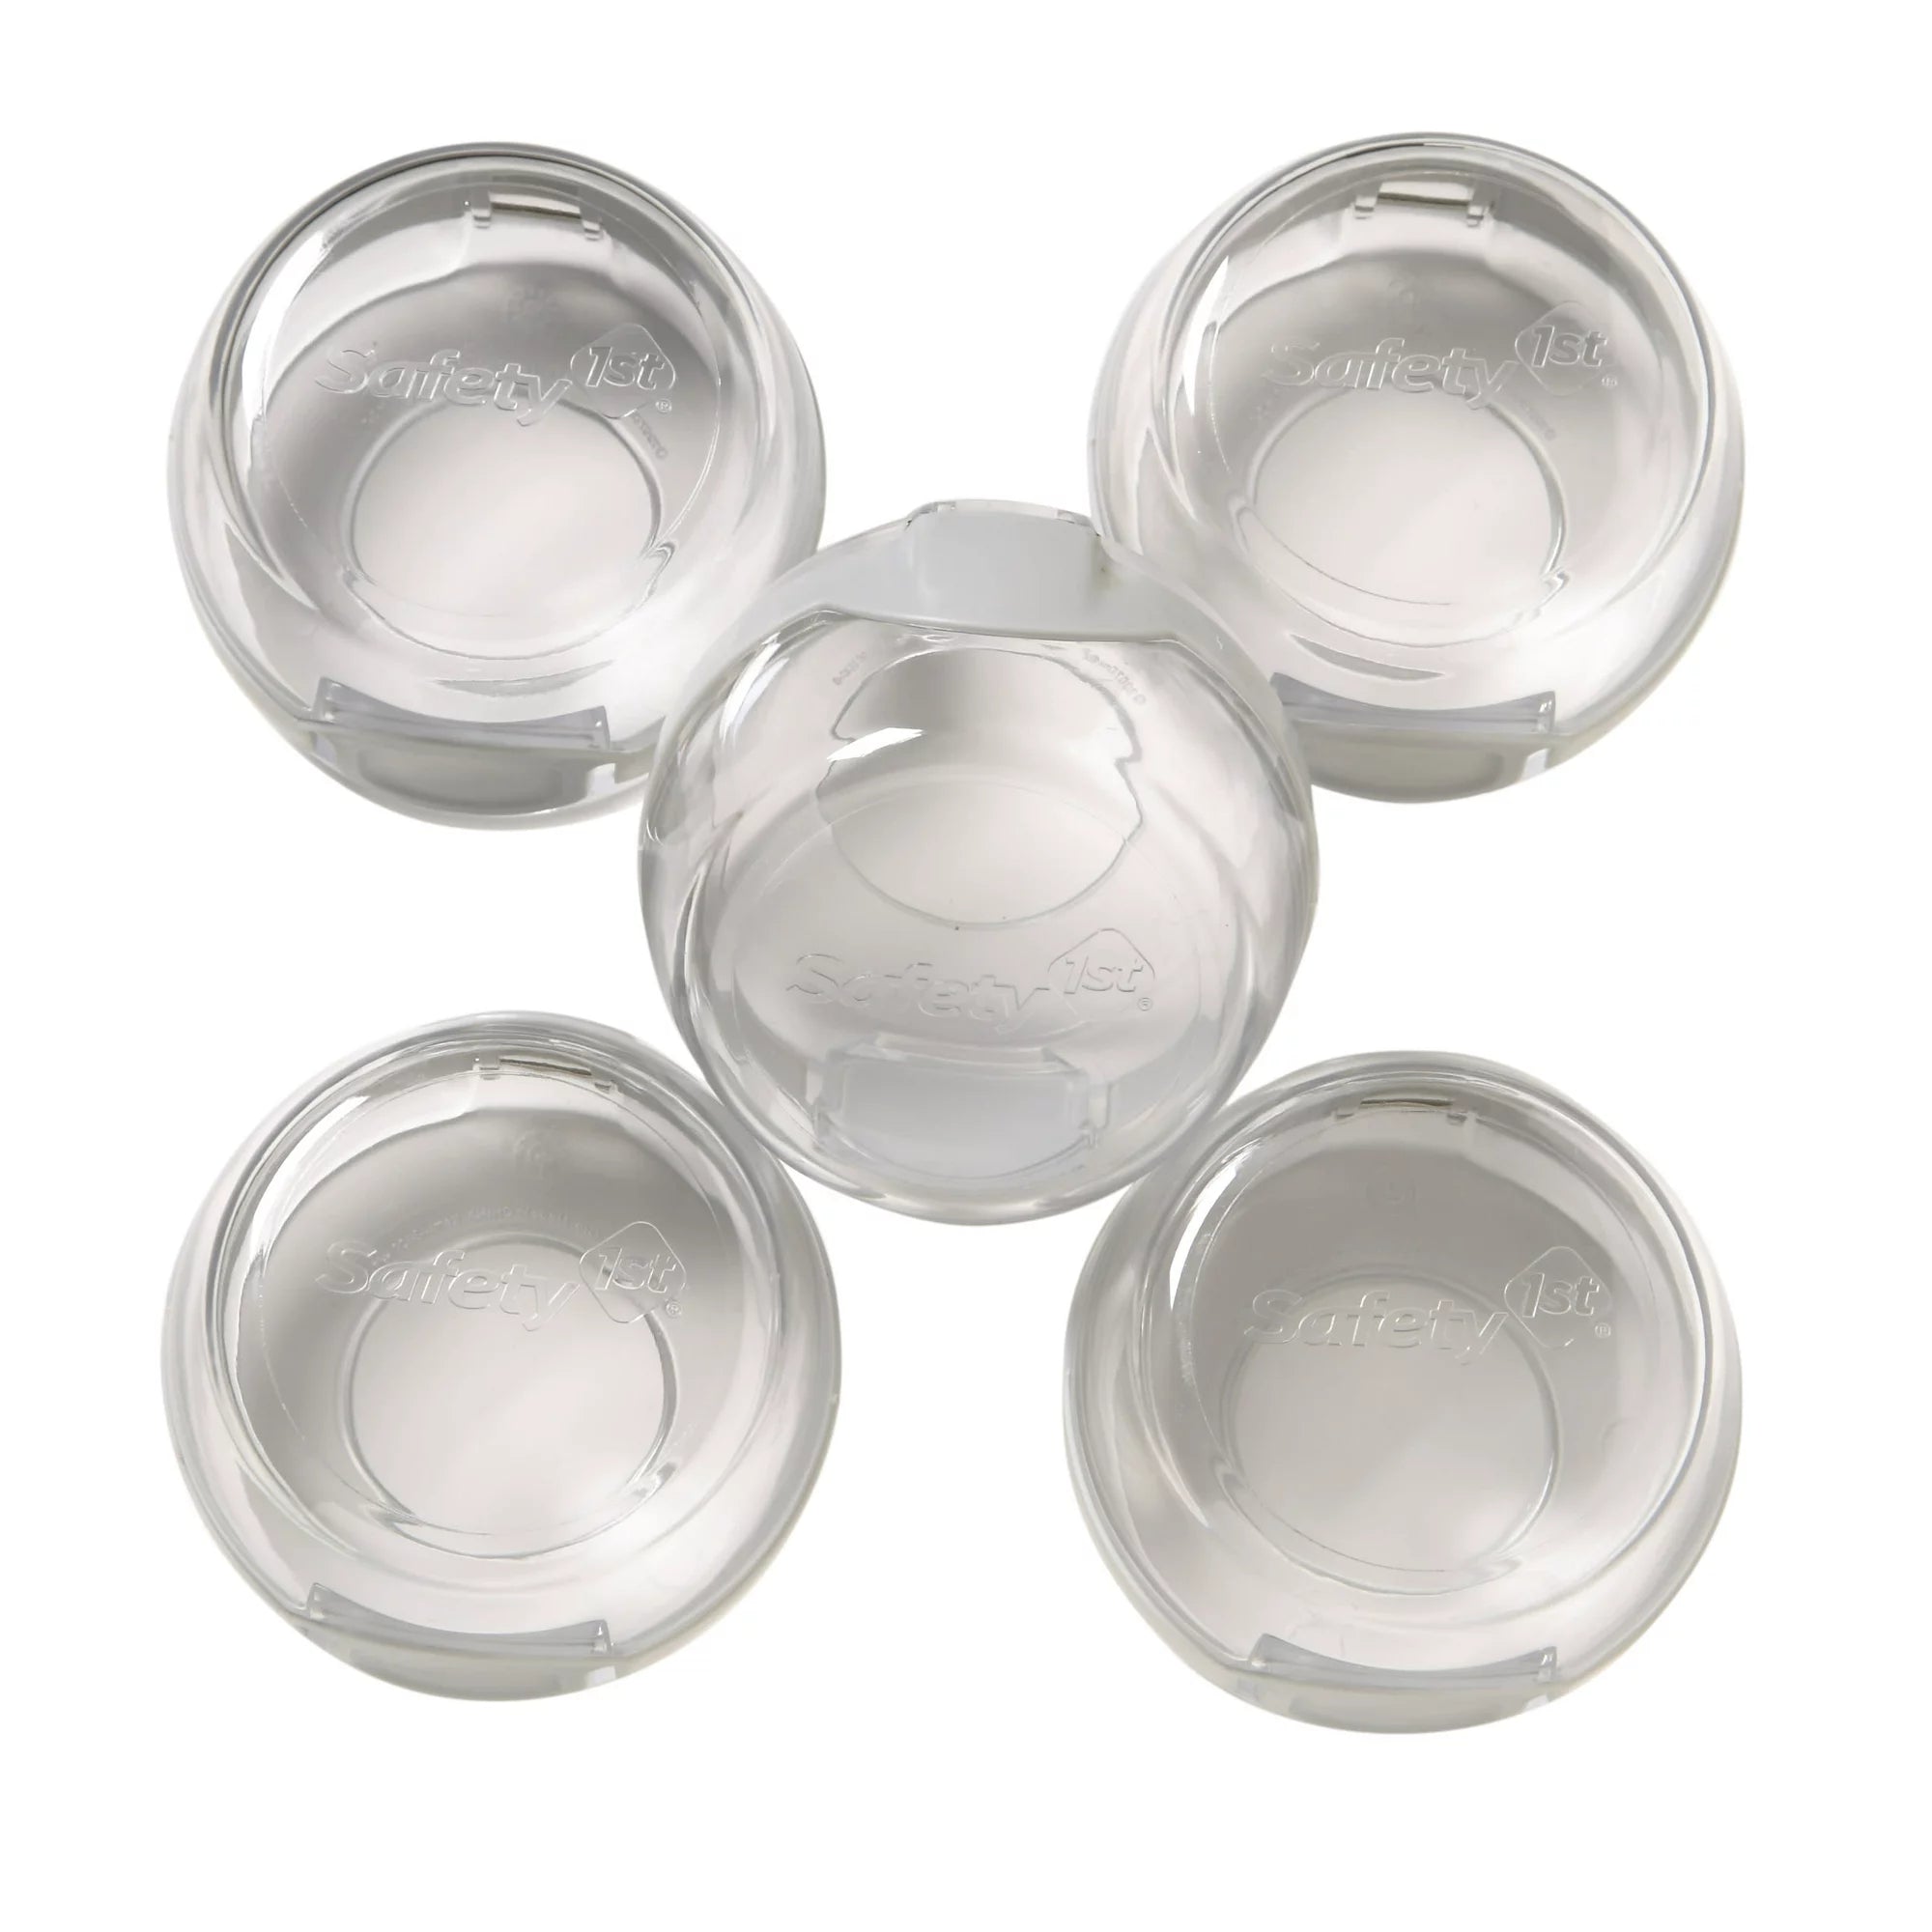 Safety 1st Clear View Stove Knob Covers (5 Pack)